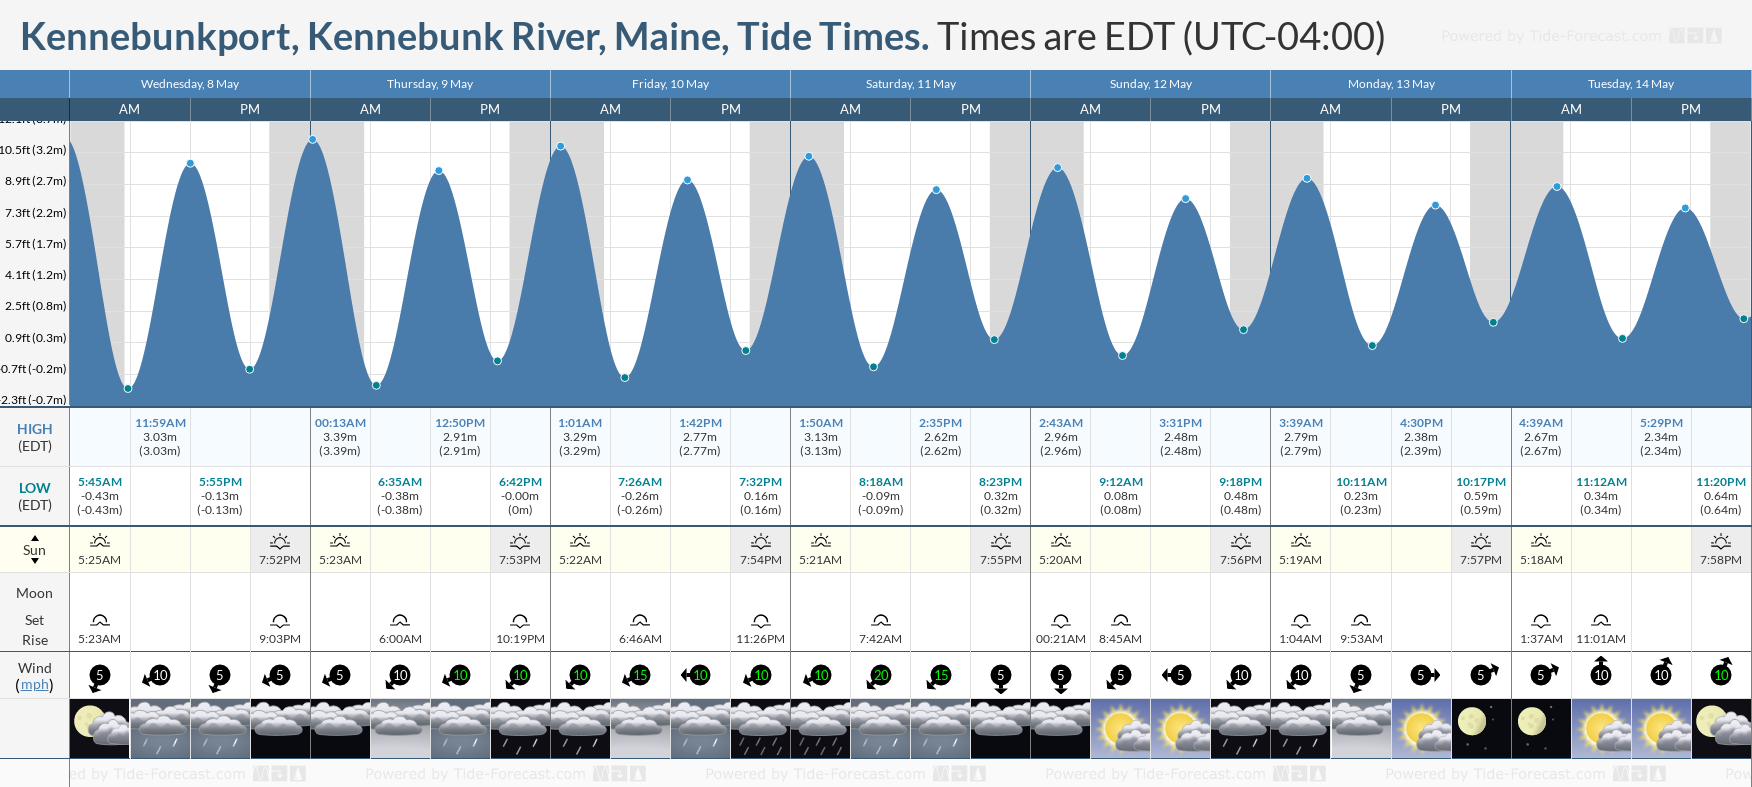 Kennebunkport, Kennebunk River, Maine Tide Chart including high and low tide tide times for the next 7 days